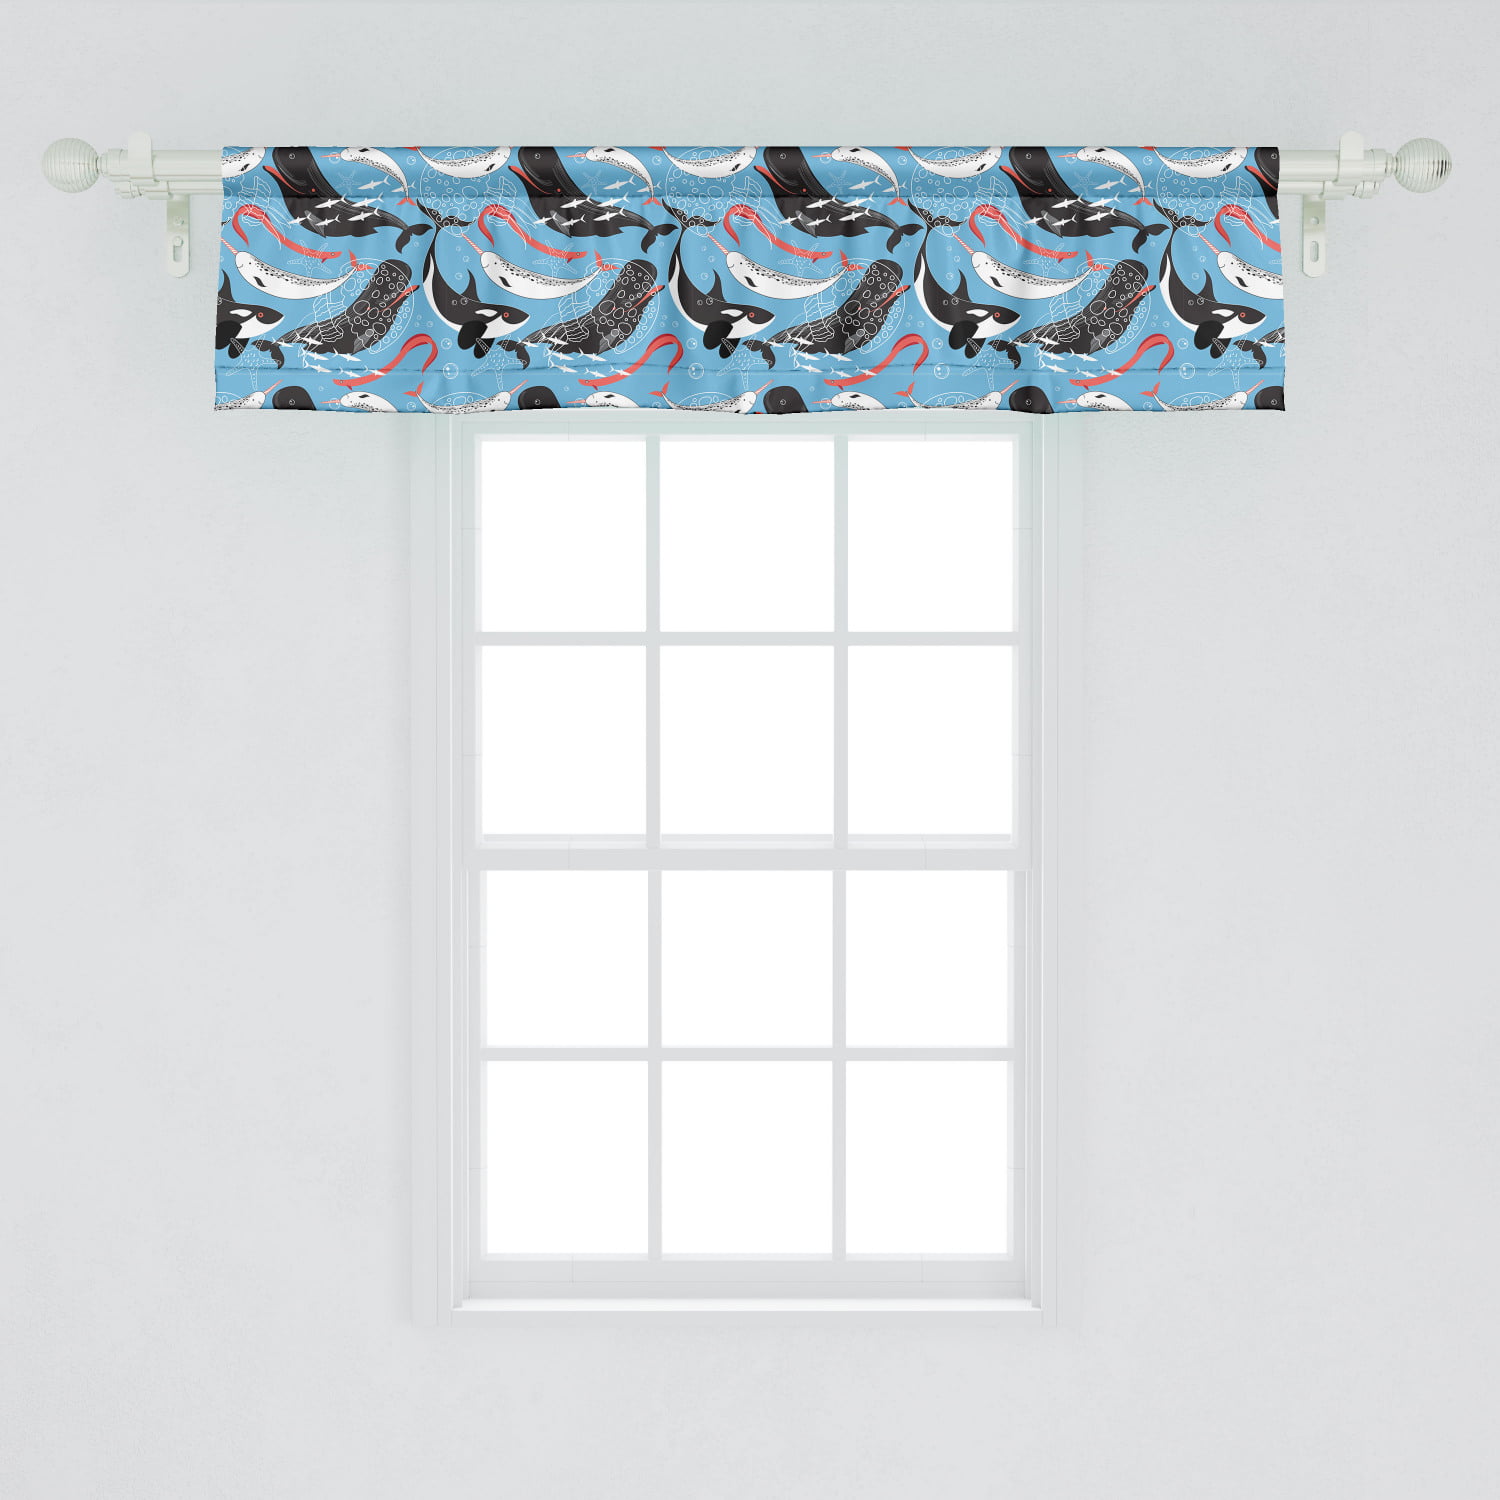 Turqouise White Curtain Valance for Kitchen Bedroom Decor with Rod Pocket 54 X 12 Sketch of Bottlenose Dolphins Playing Laughing in The Ocean Sea Life Print Ambesonne Sea Animals Window Valance 